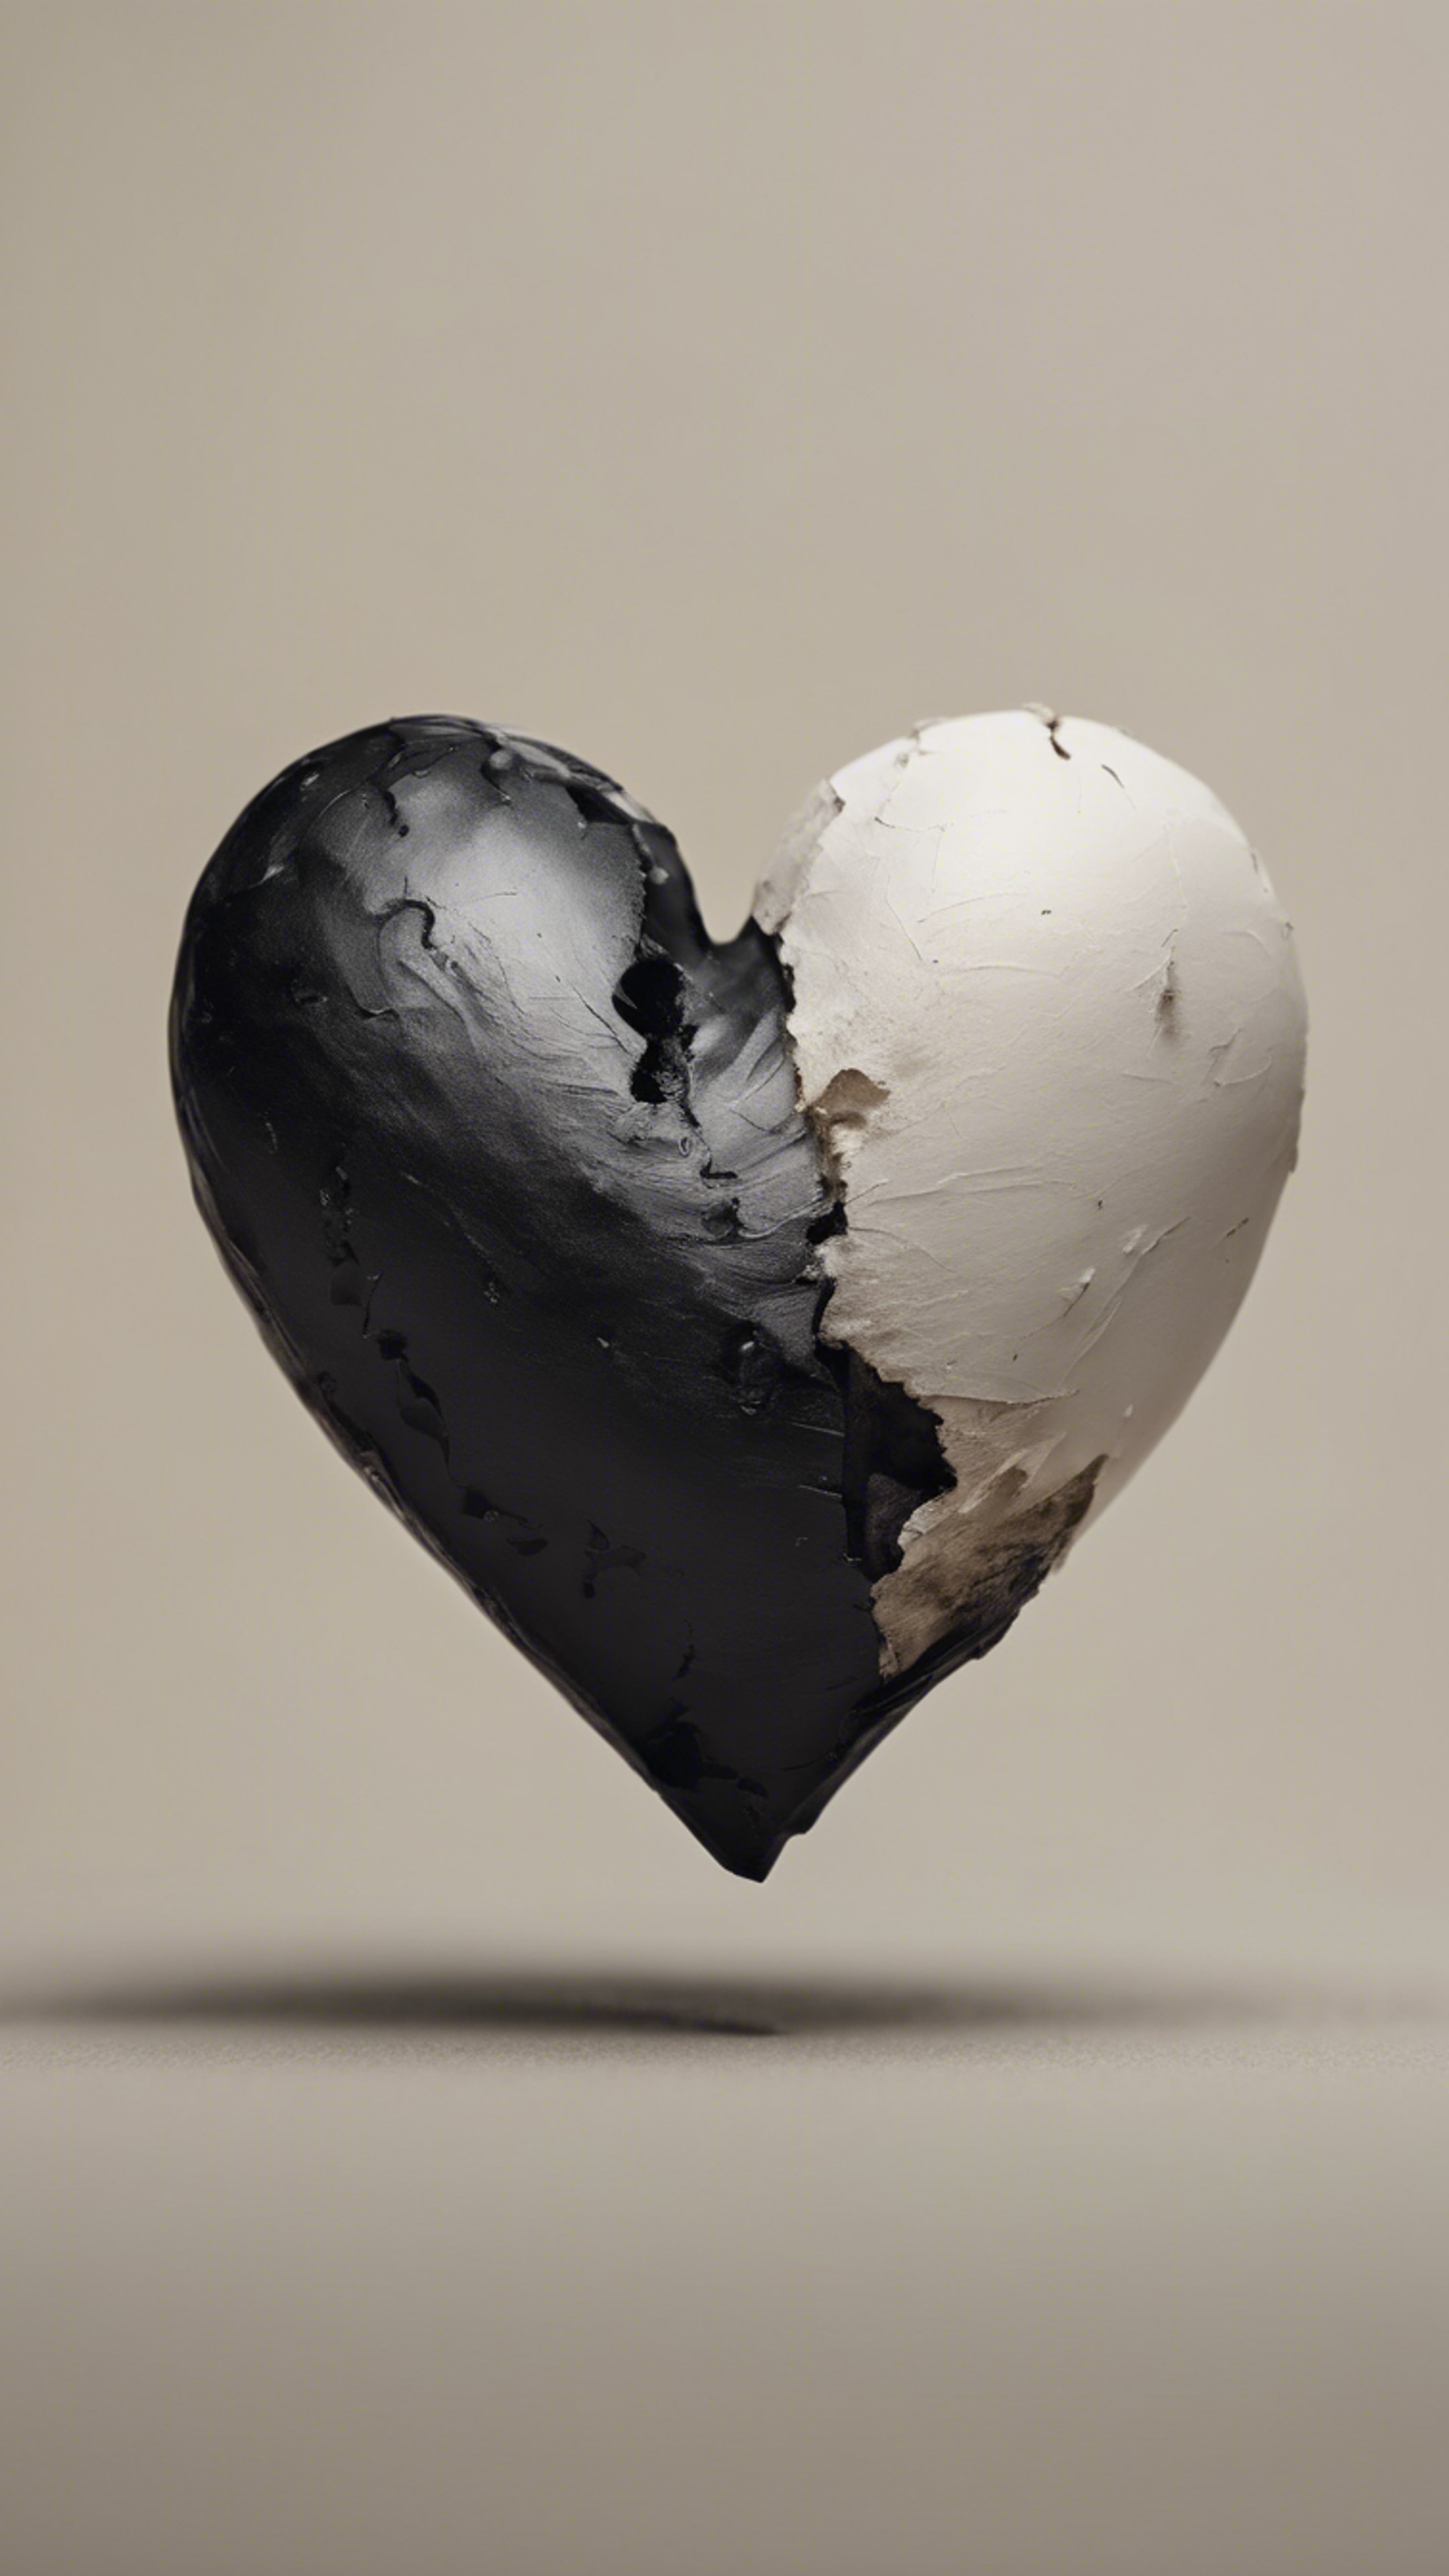 A black heart on one side and a white heart on the other side, against a neutral color background. 벽지[e1ad96bec27b409fa1a8]